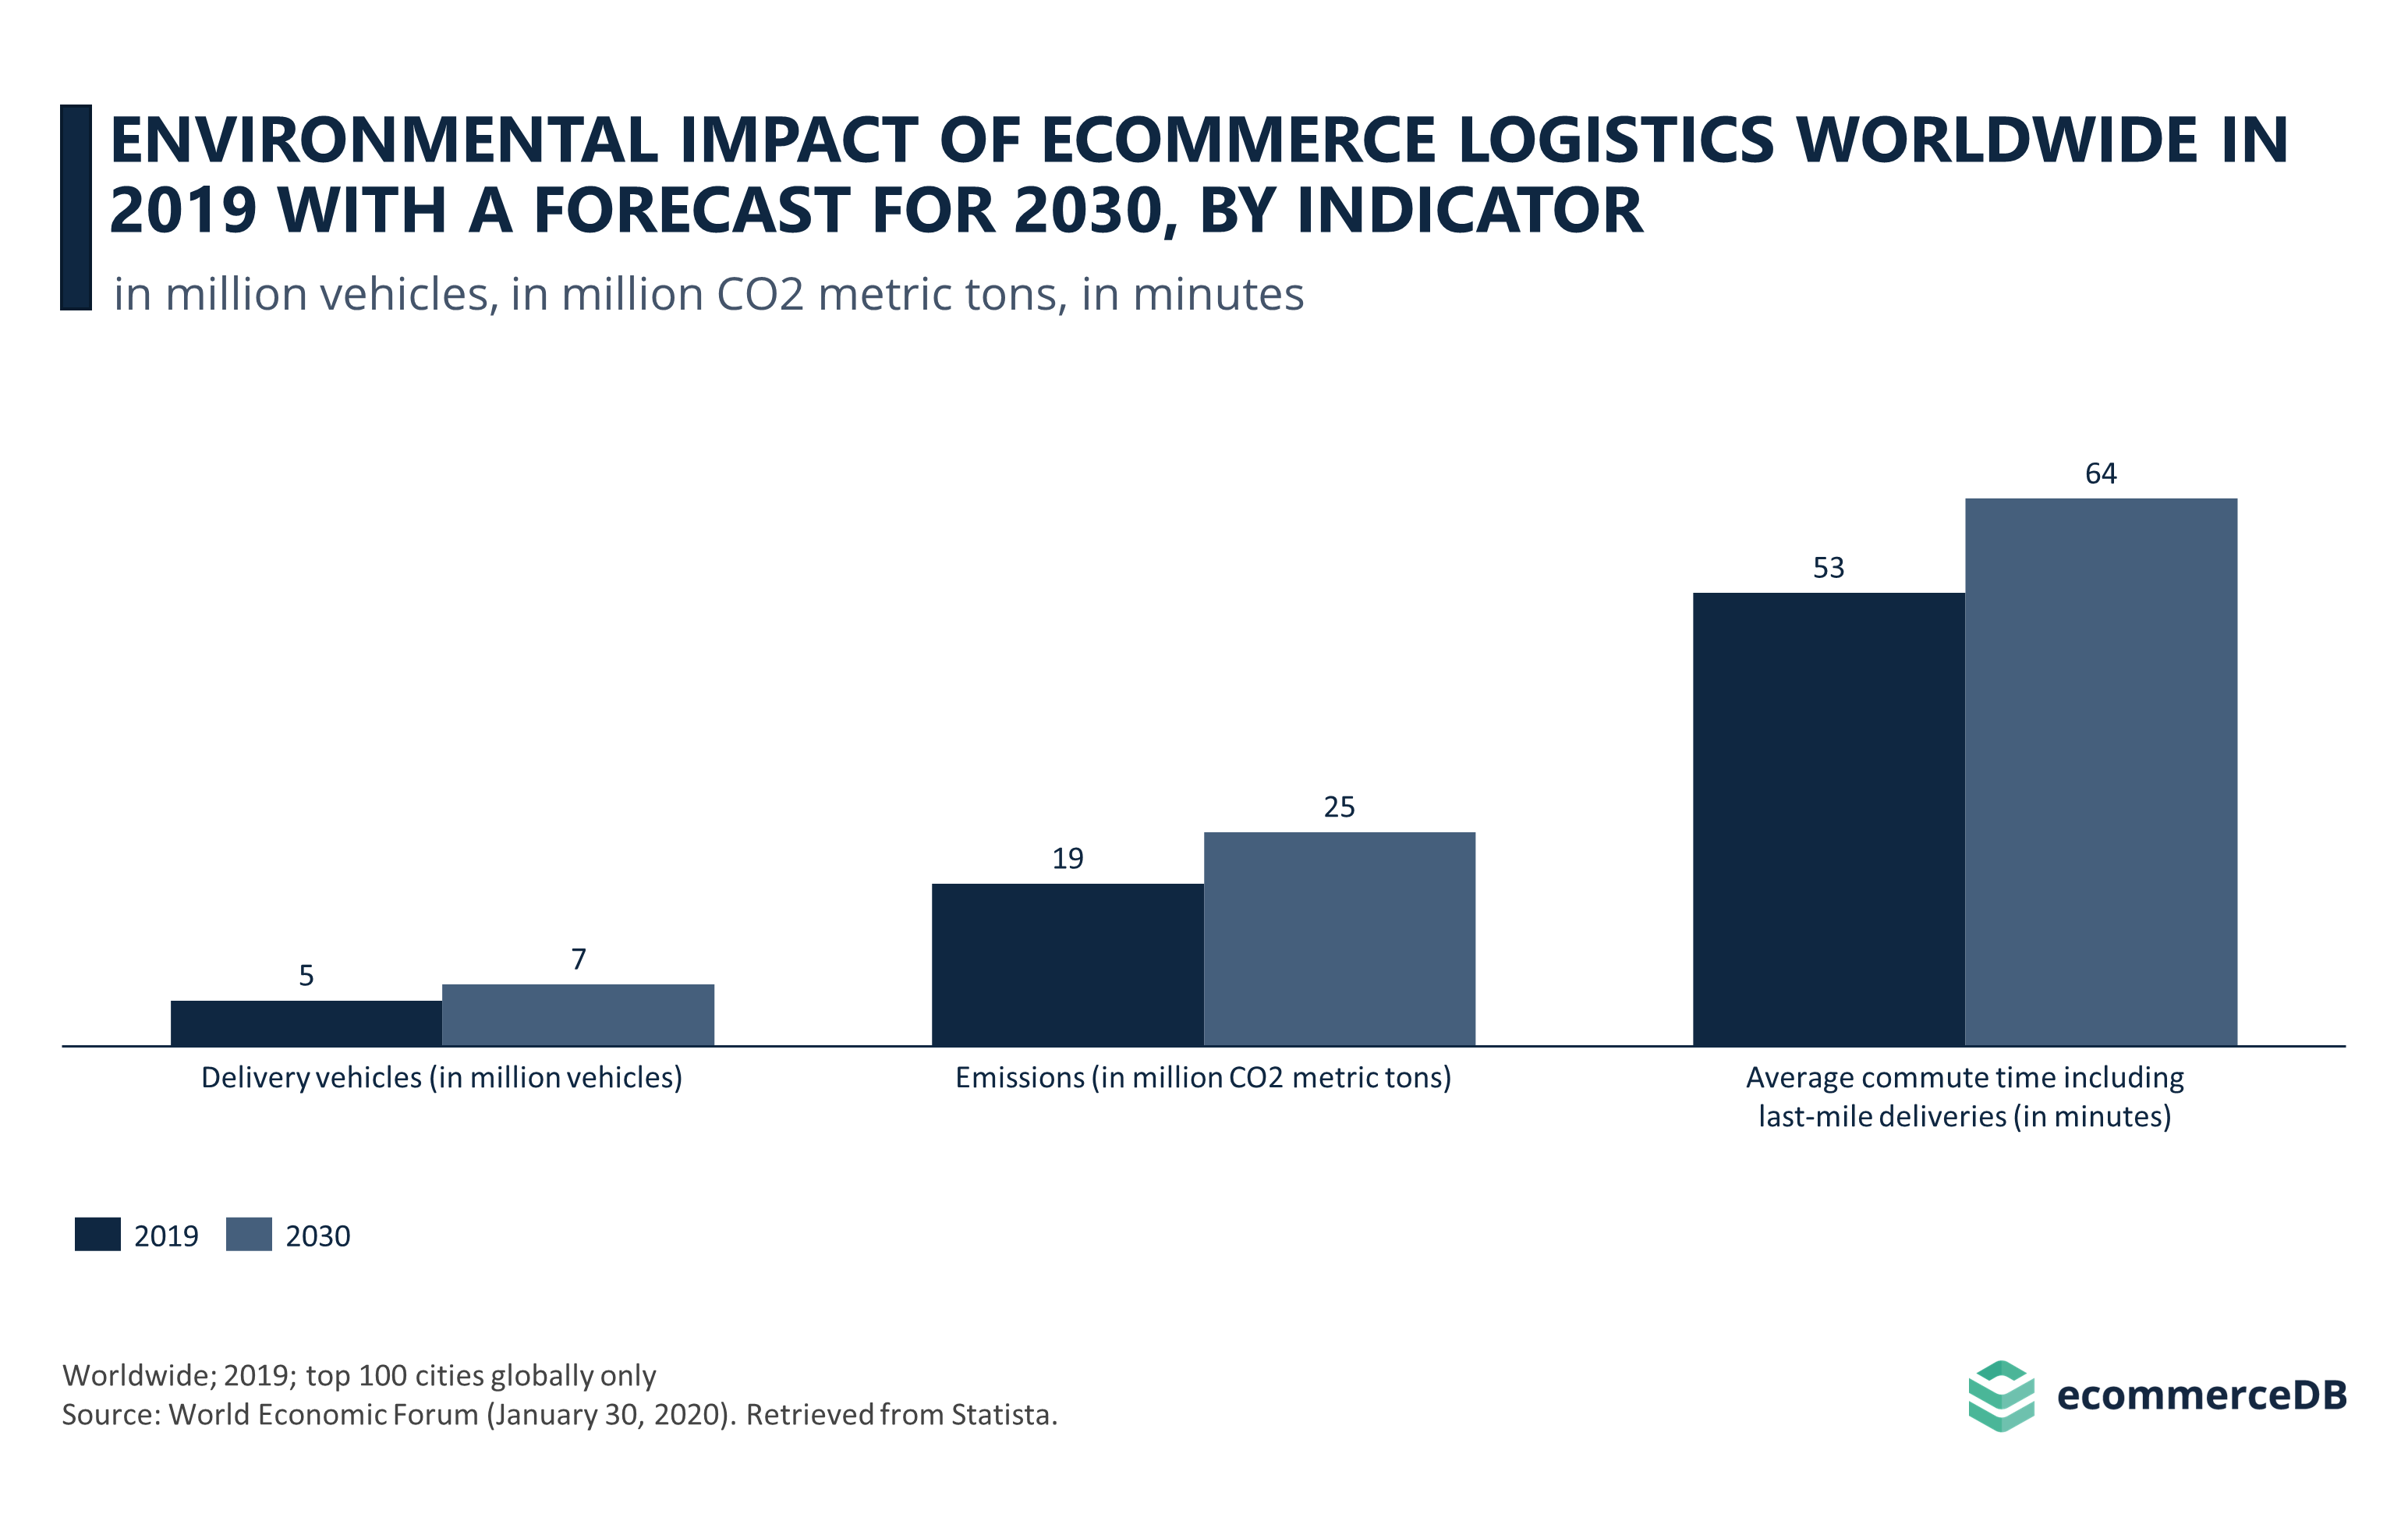 Environmental impact of e-commerce logistics worldwide in 2019 with a forecast for 2030, by indicator